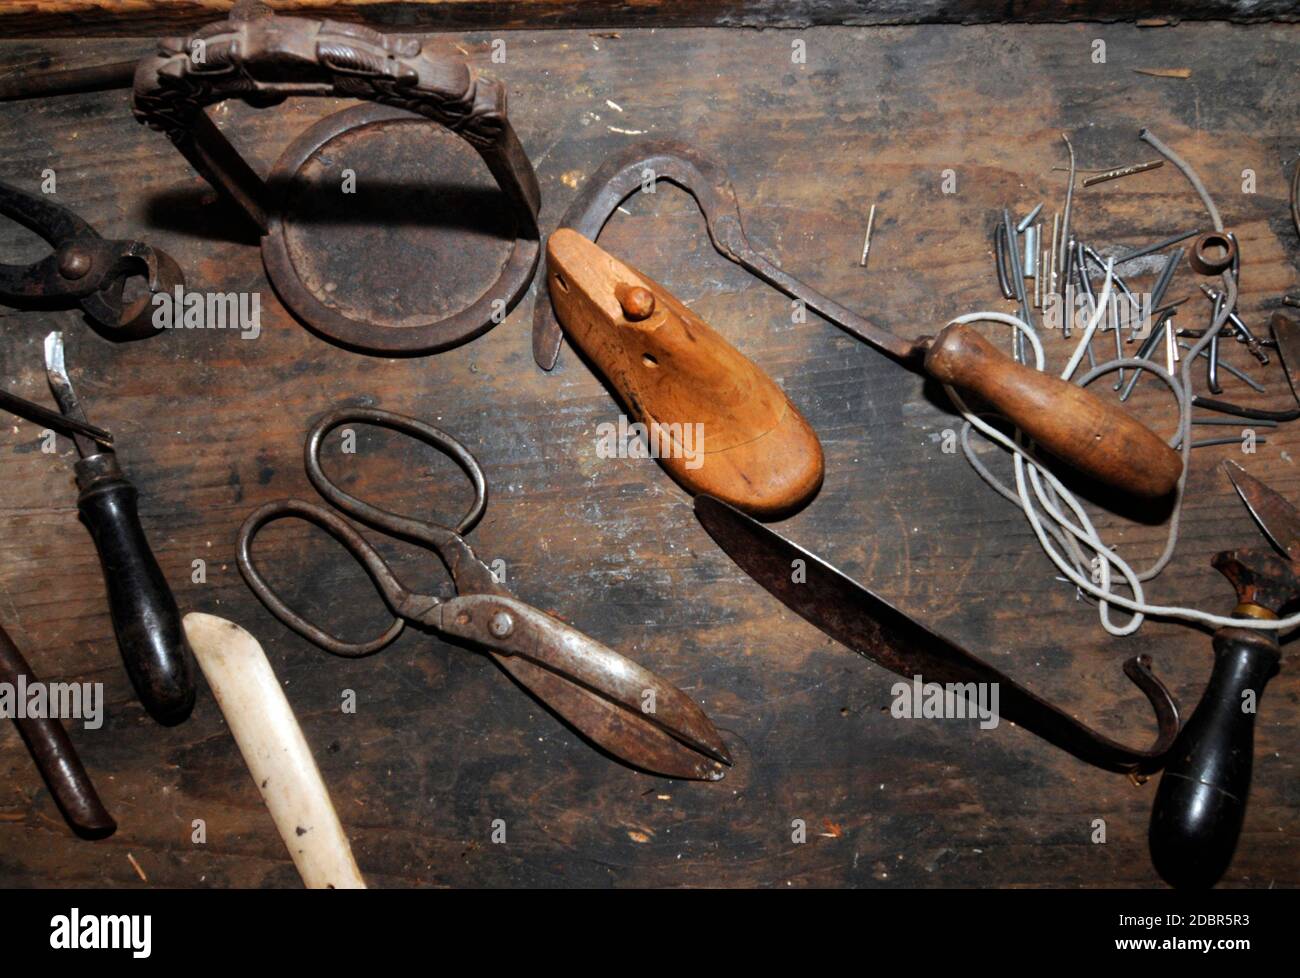 Repairs Footwear High Resolution Stock Photography and Images - Alamy